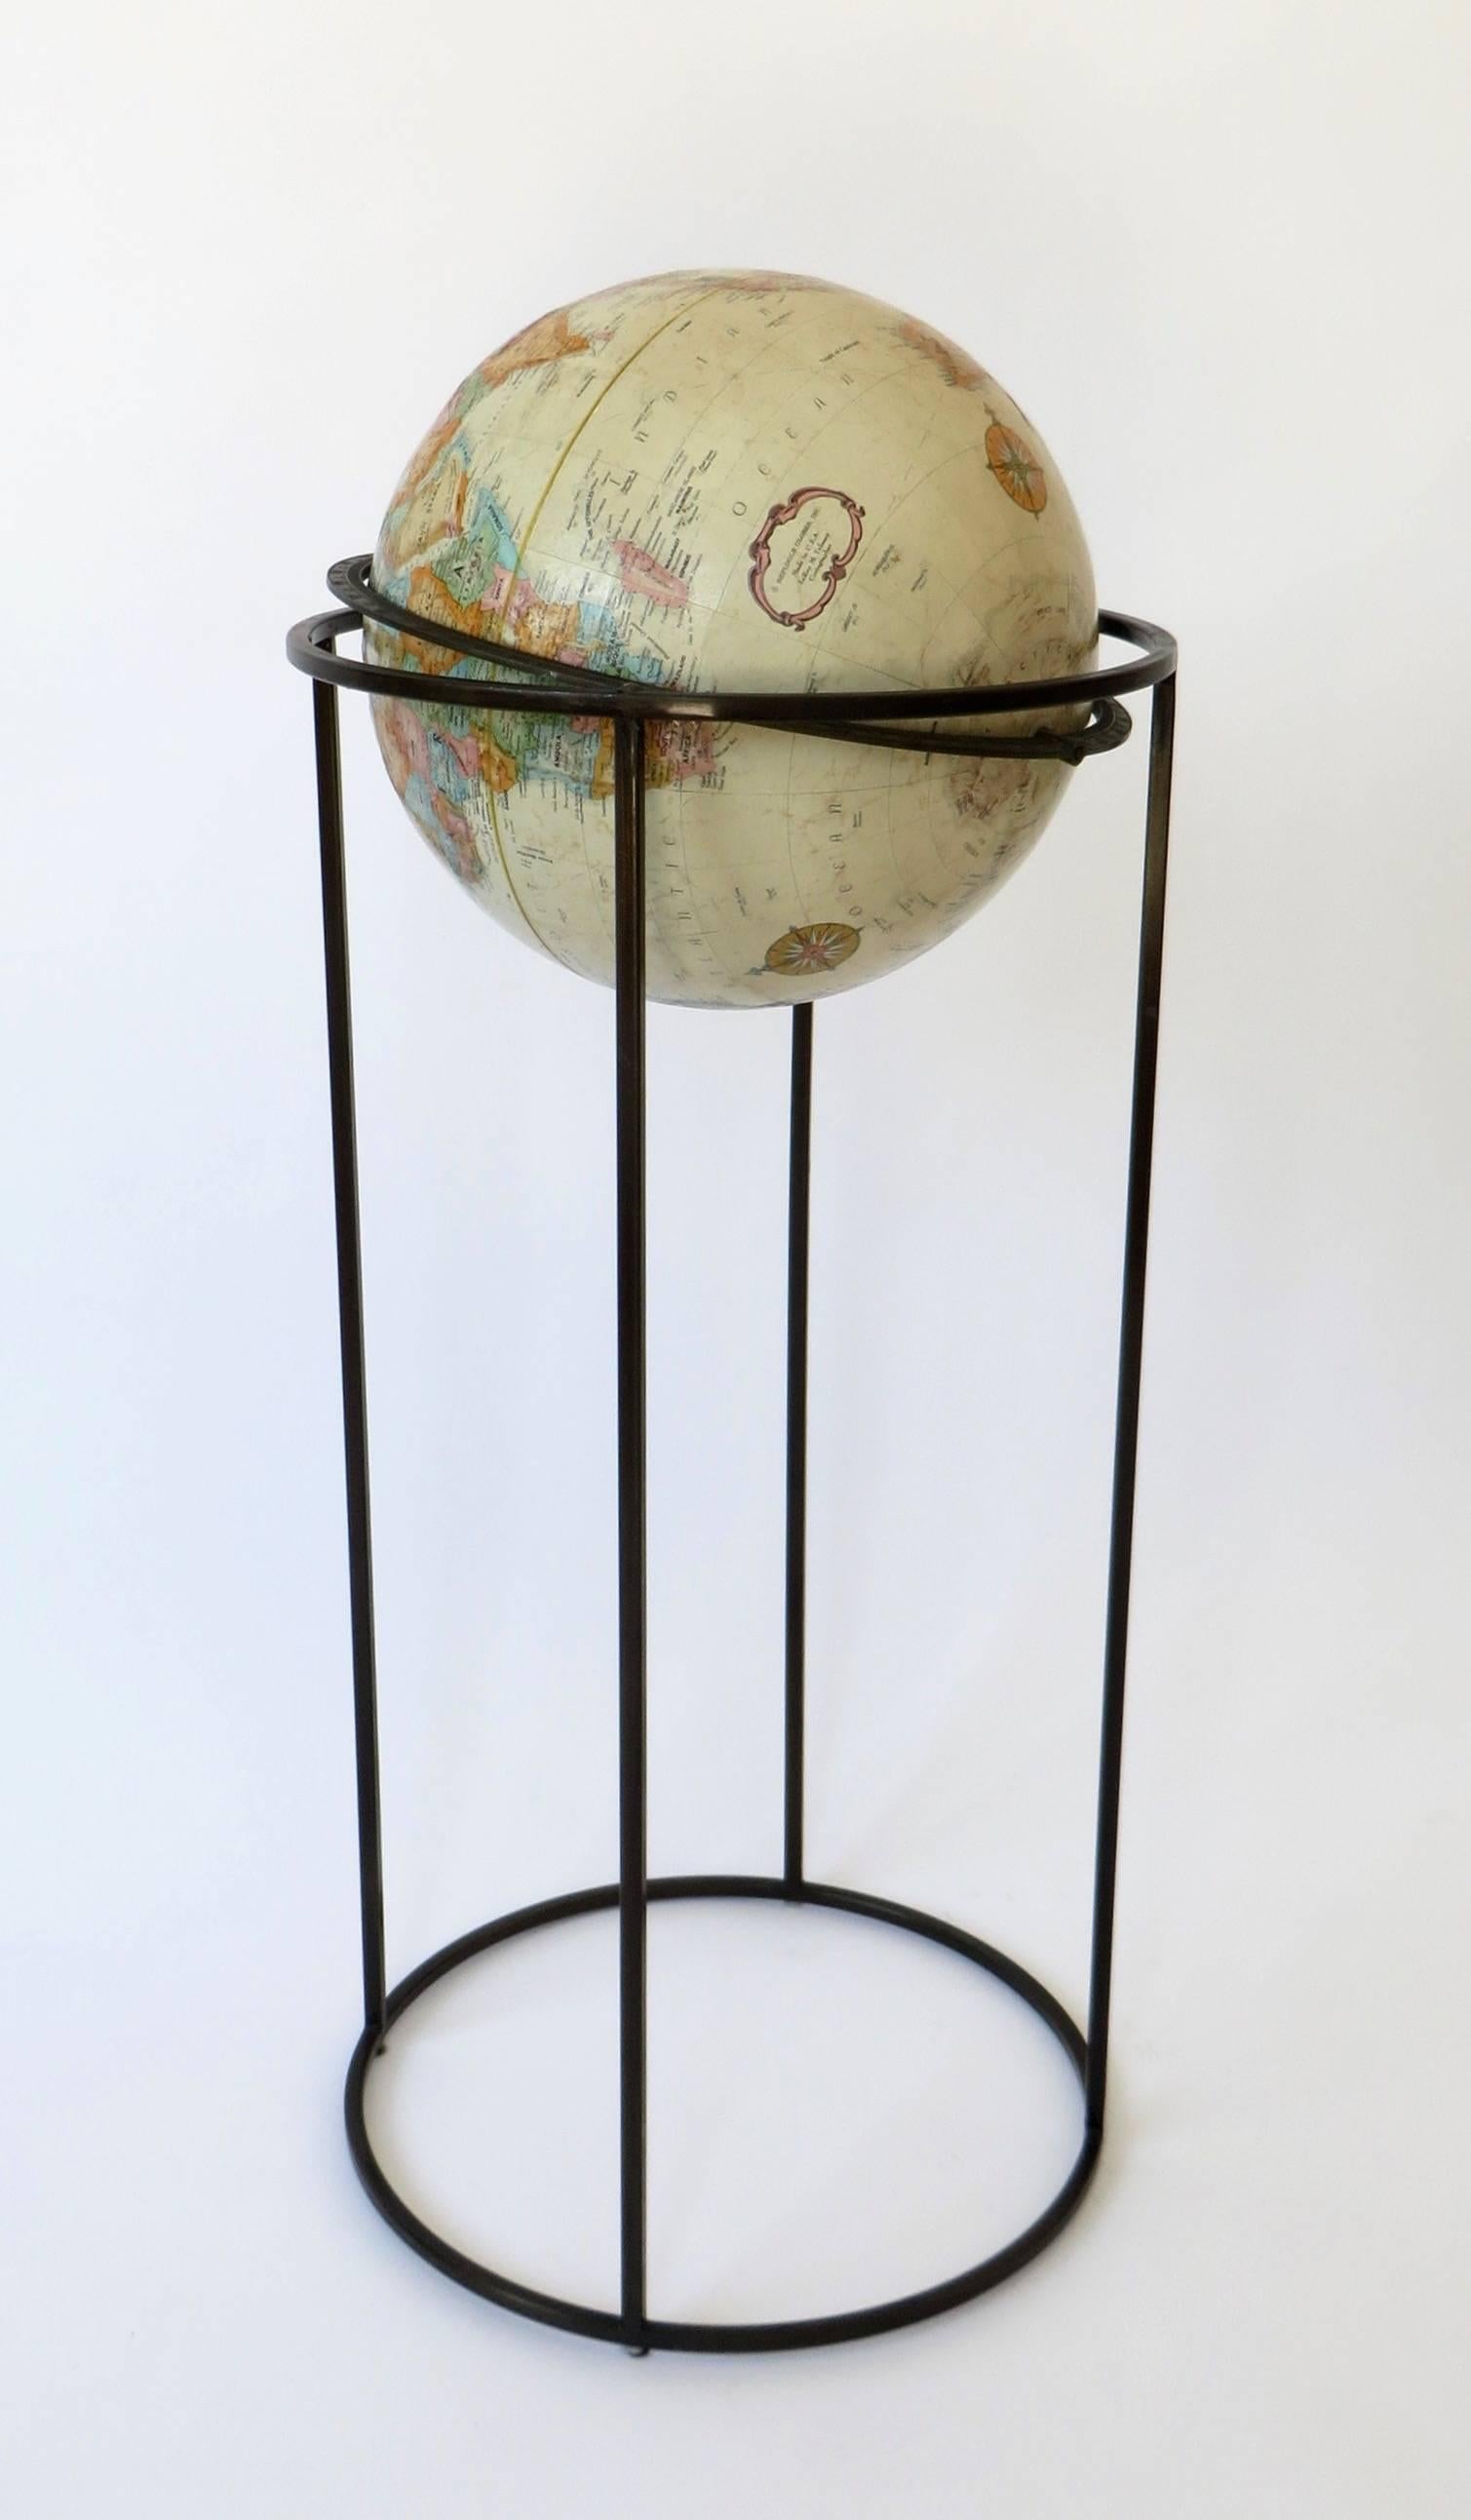 This Replogle 12" "World Classic" series standing globe, circa 1970 and is attributed to Paul McCobb. The rotating globe is in excellent condition. The base is in excellent condition.
The three pole base is circular and very